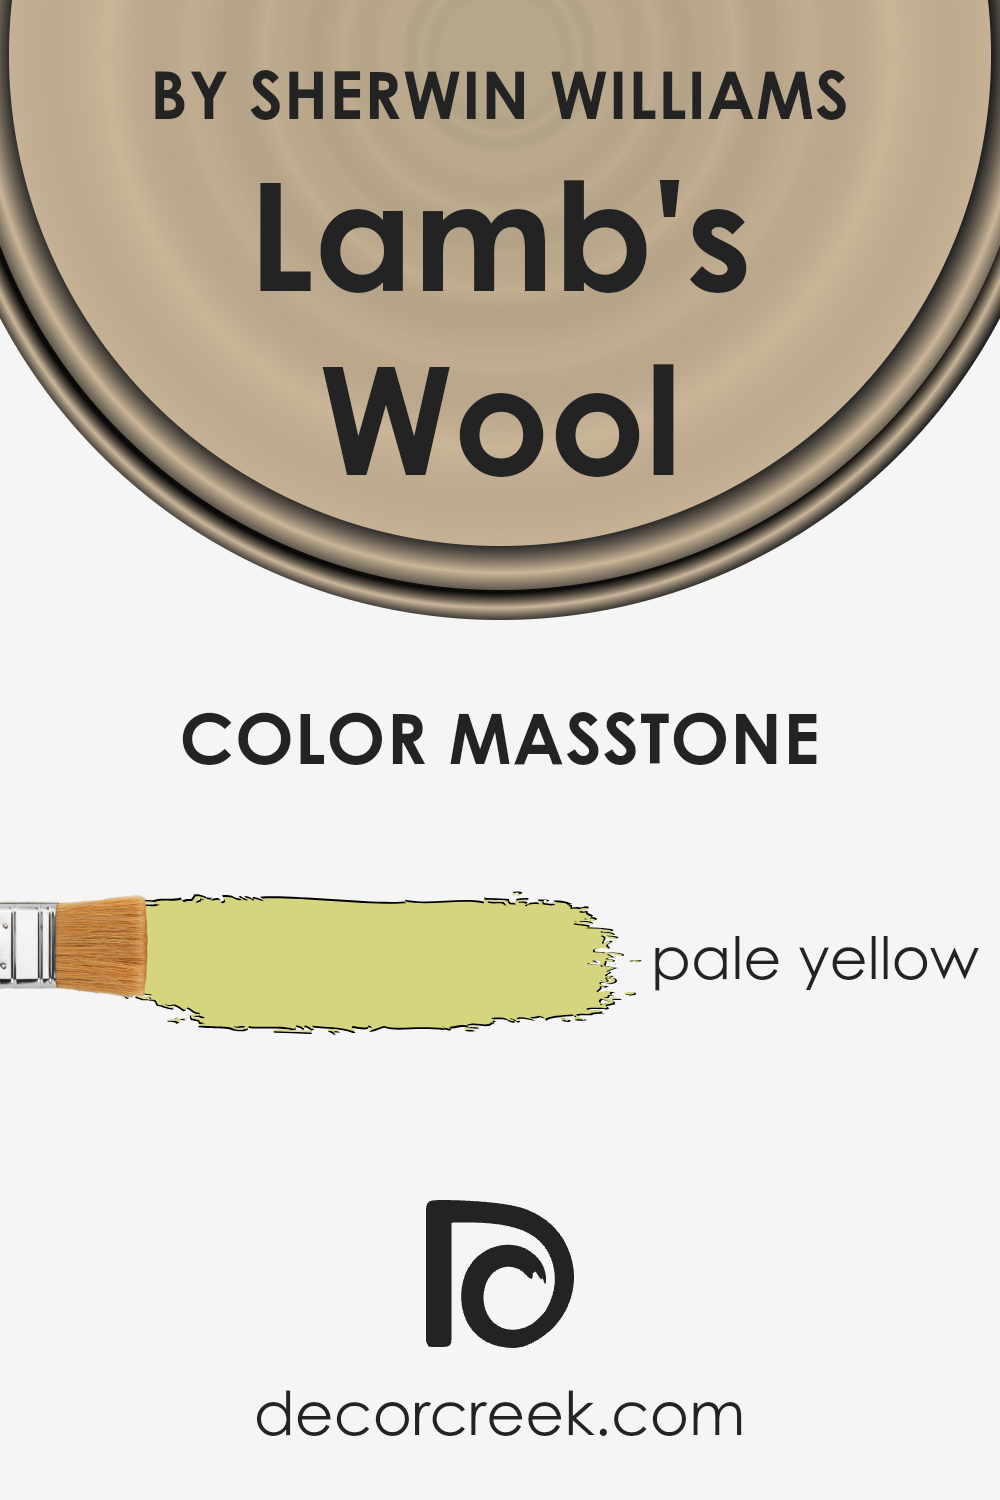 what_is_the_masstone_of_lambs_wool_sw_9536